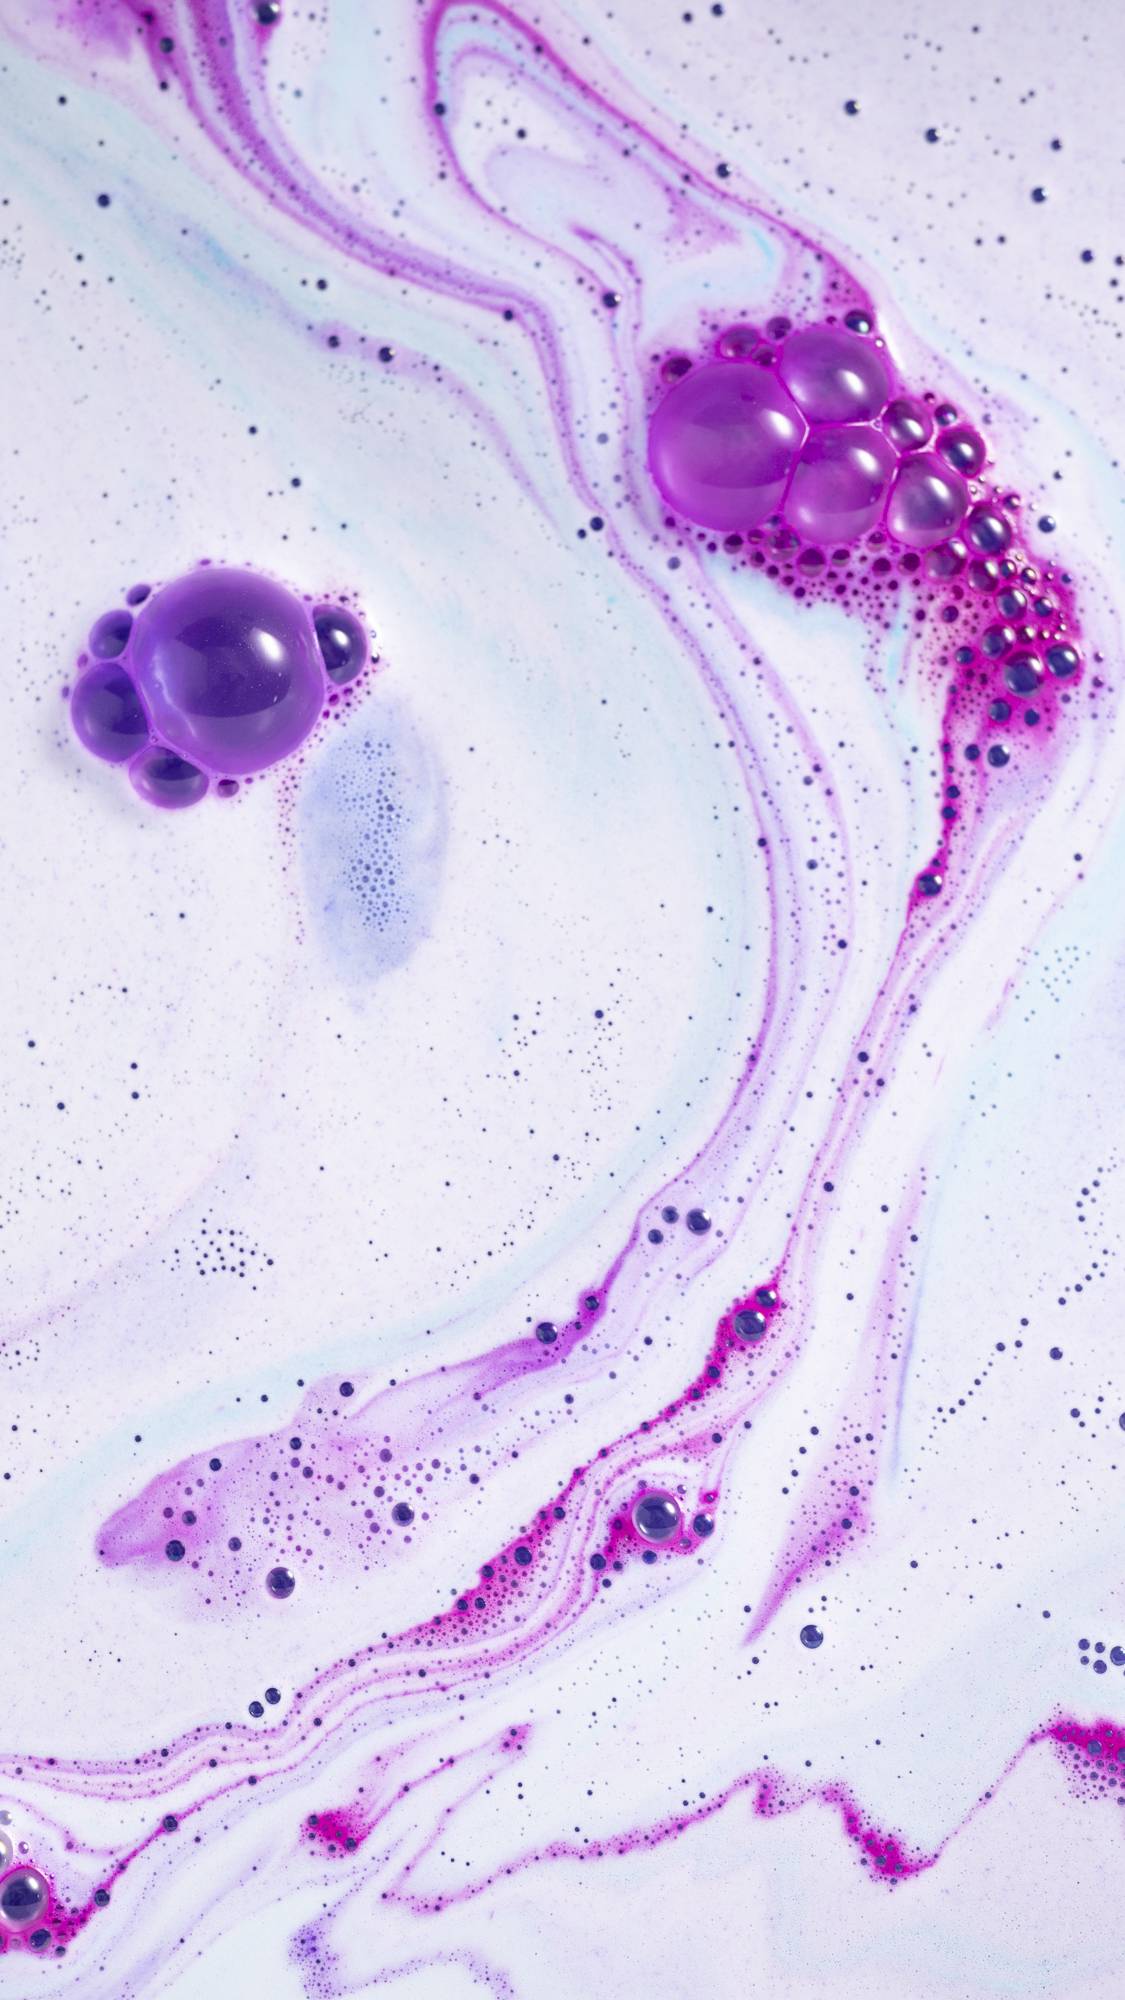 The bath bomb has fully dissolved leaving behind a galaxy of blue, pink and purple swirls. 